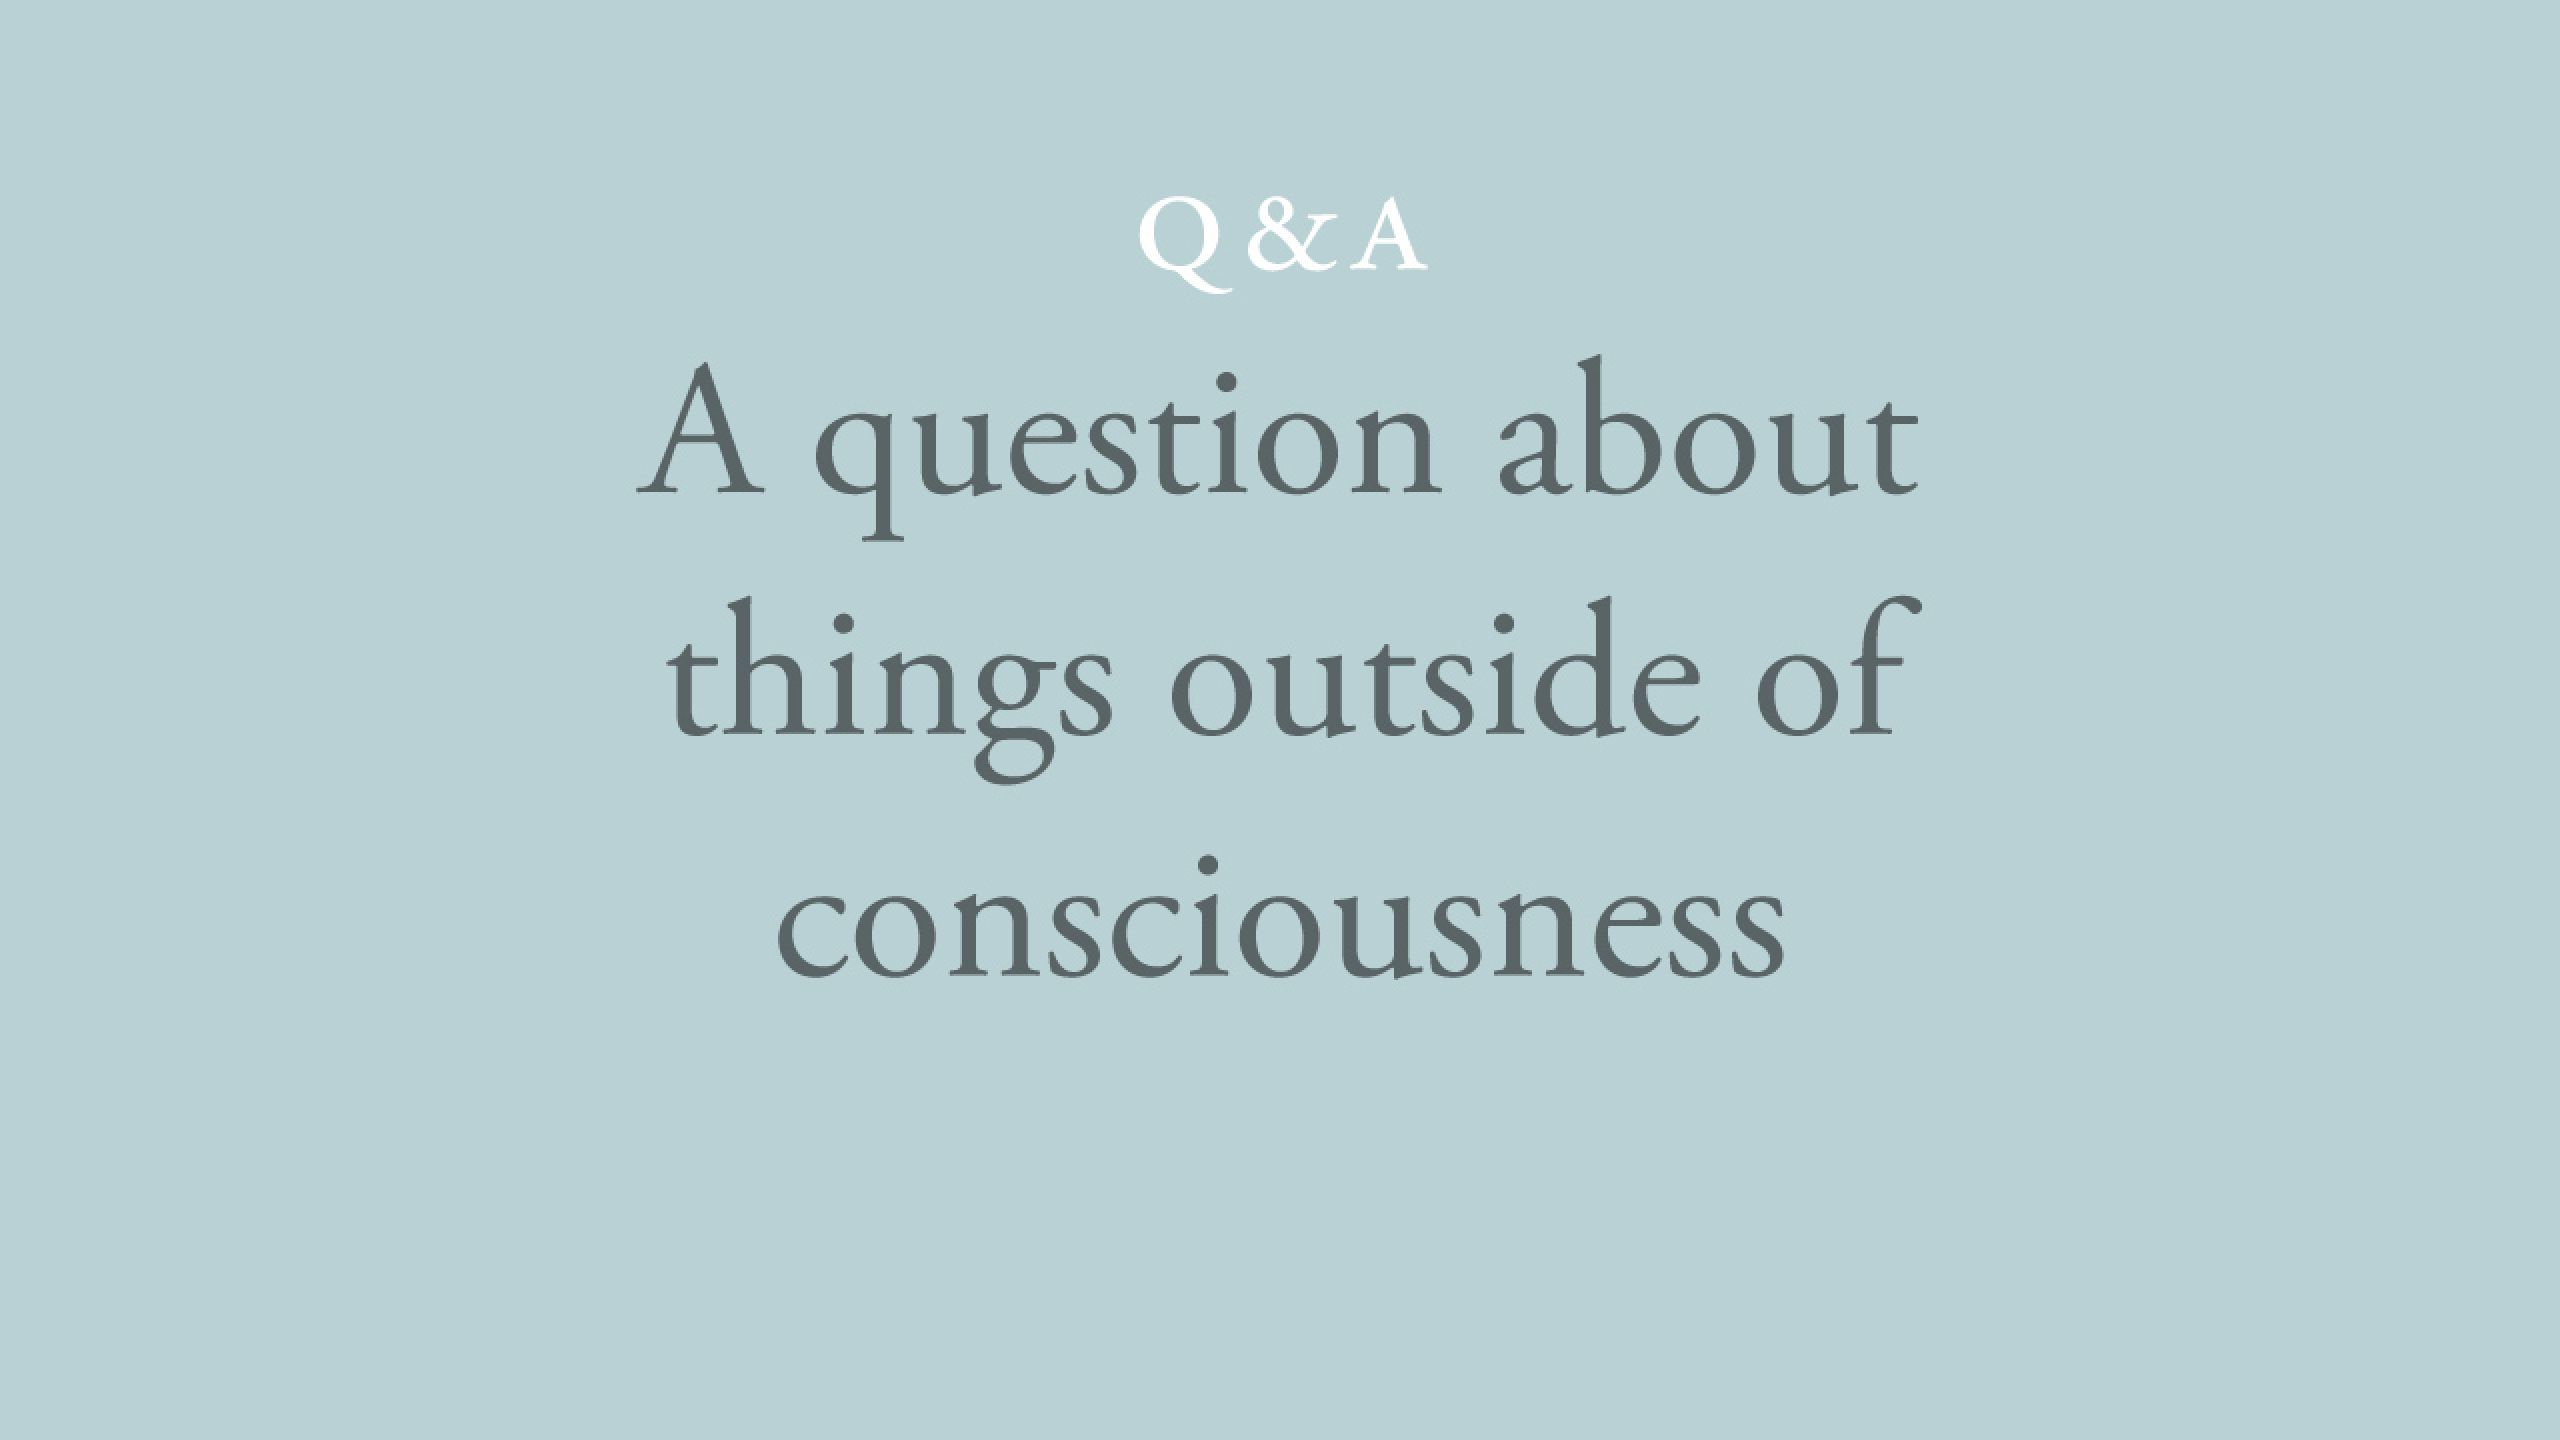 Do things outside of my consciousness exist? 